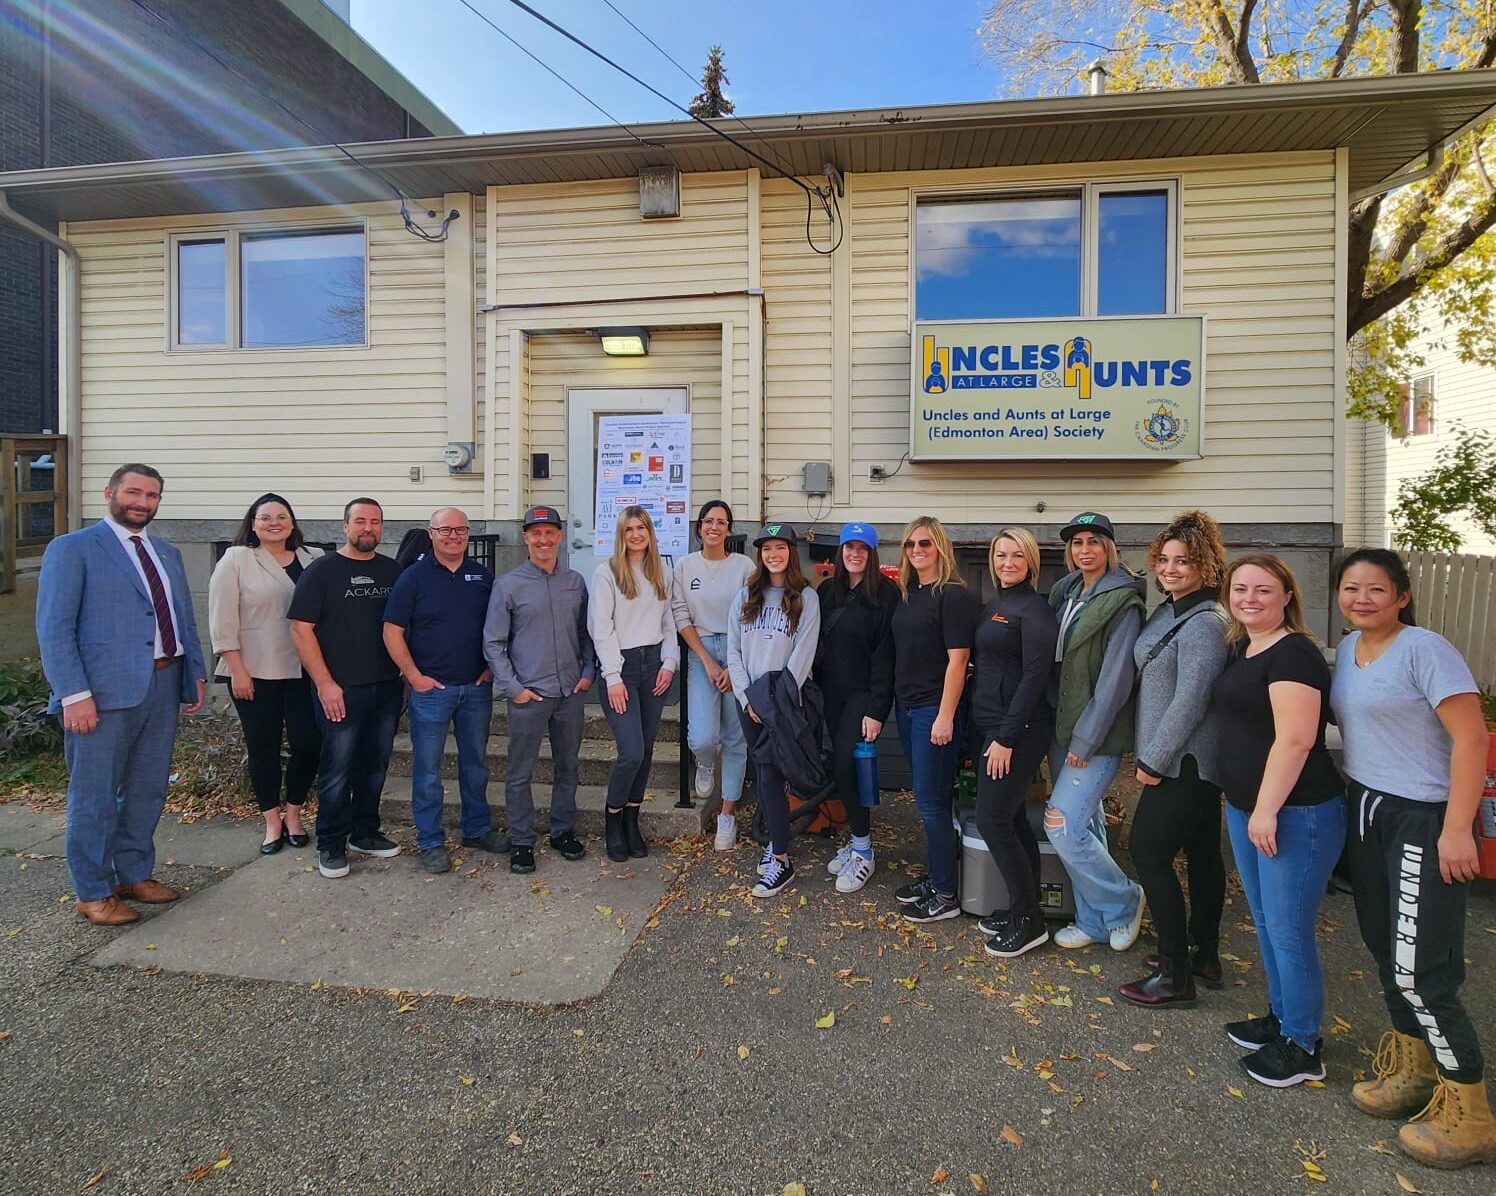 Members of CHBA Edmonton Region (CHBA-ER) came together to give back to their community by partnering with local charity Uncles & Aunts at Large Edmonton Area Society.